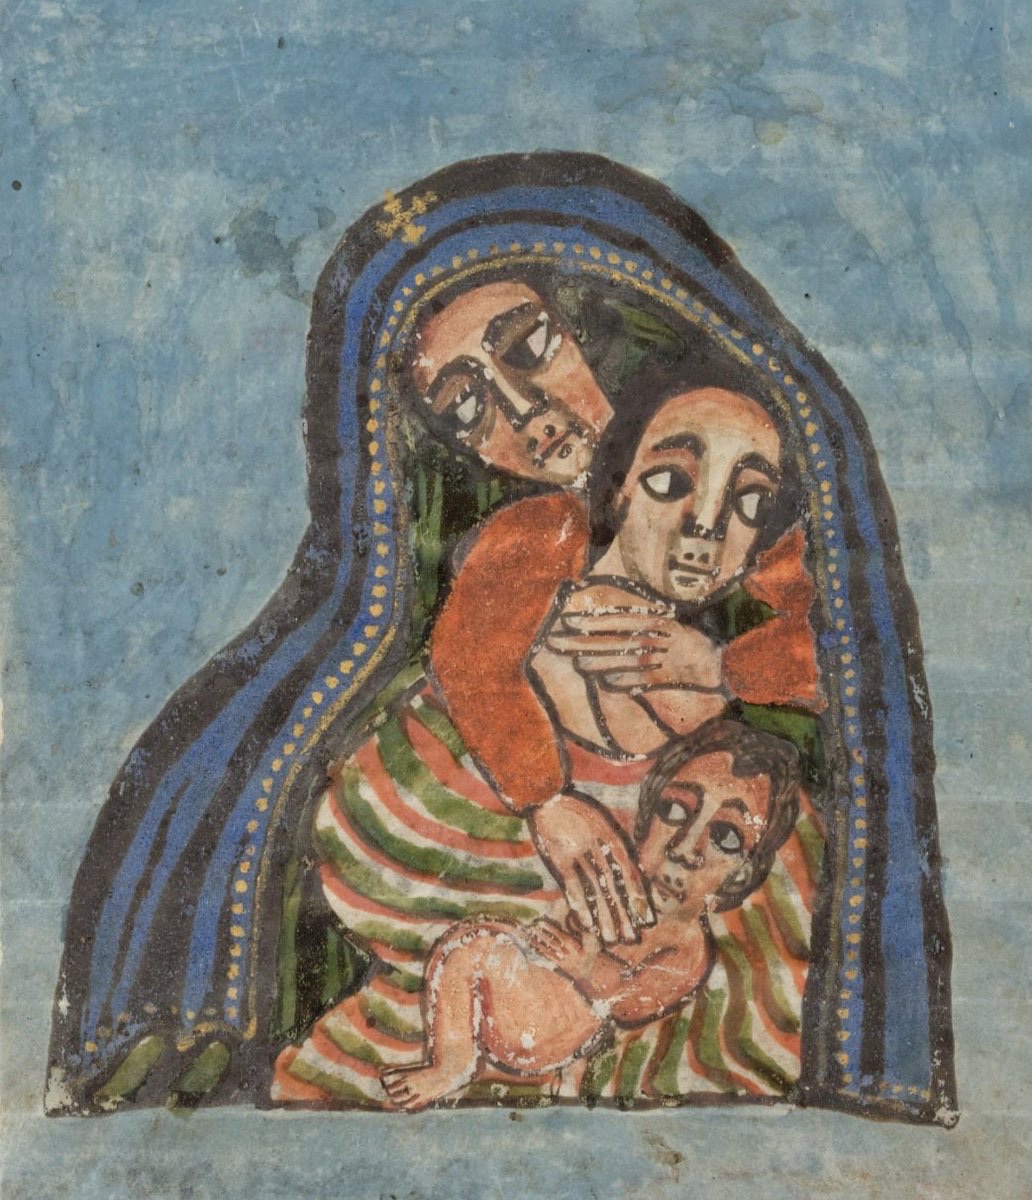 'You are the foundation of the whole world, you who became the dwelling-place of the Great and Most-High God – have mercy on me and overshadow me with the shadow of your garment!'

Ethiopia, 19th c.   #StMary #mother #saatat #geezliterature #africanart